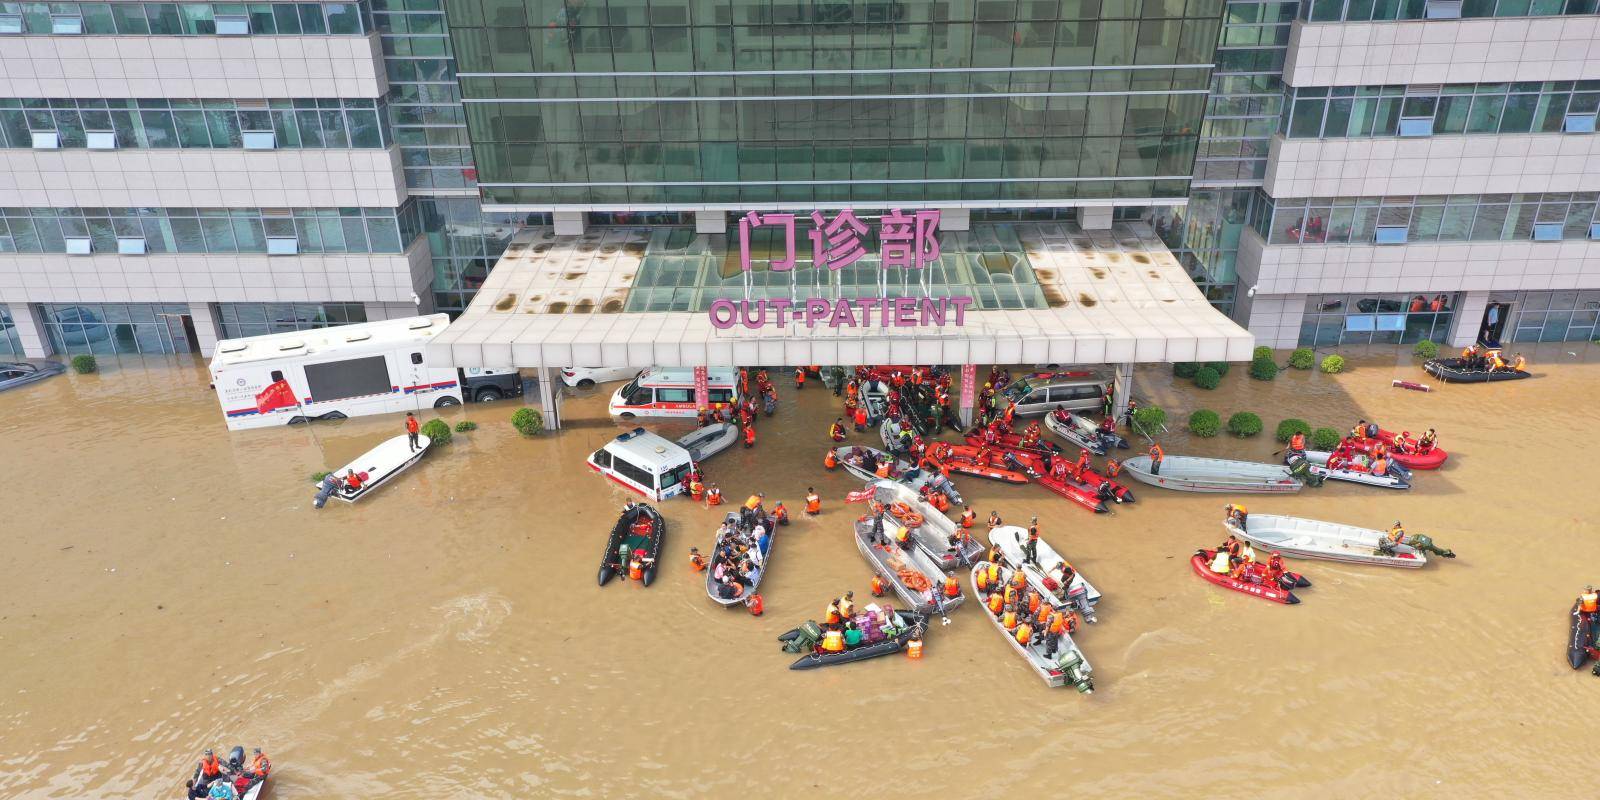 Photo shows rescue workers in boats working to evacuate a flooded hospital in Zhengzhou, China